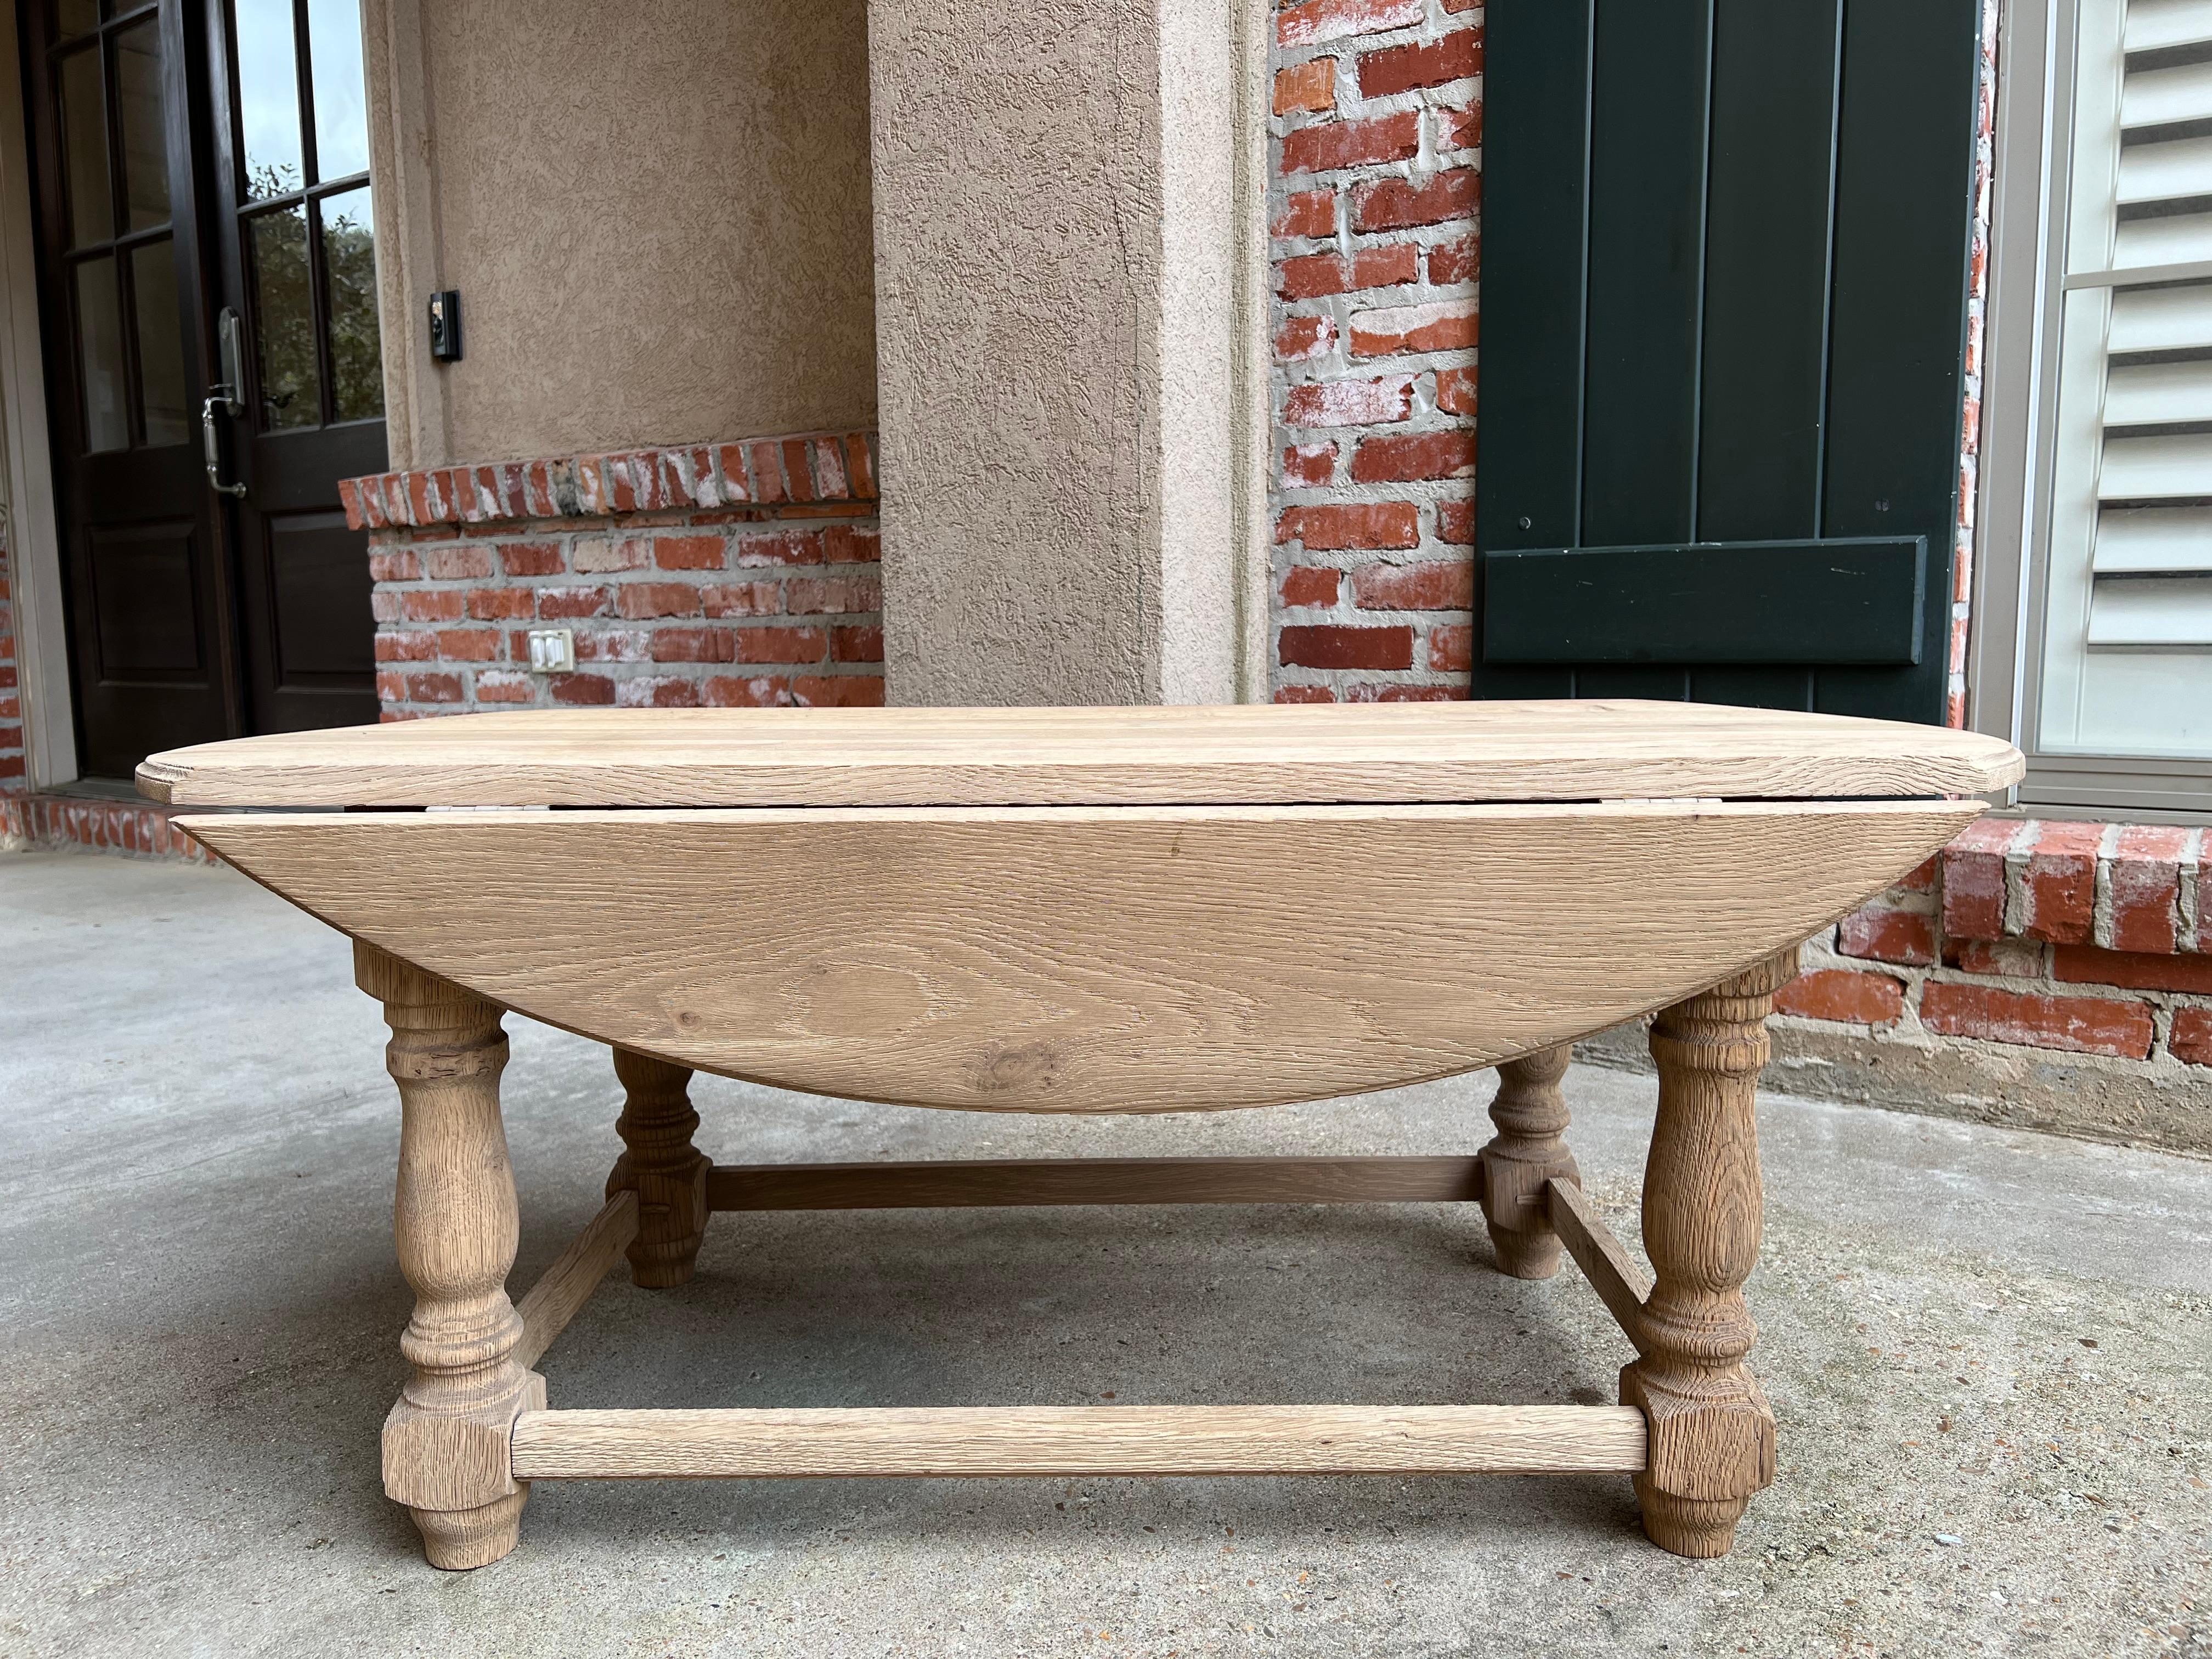 Vintage English Oak Bleached coffee table Slender drop leaf Wake table style oval.

Direct from England, this vintage English coffee table with a lovely silhouette and completely bleached finish! Long and slender, in a traditional “wake table”